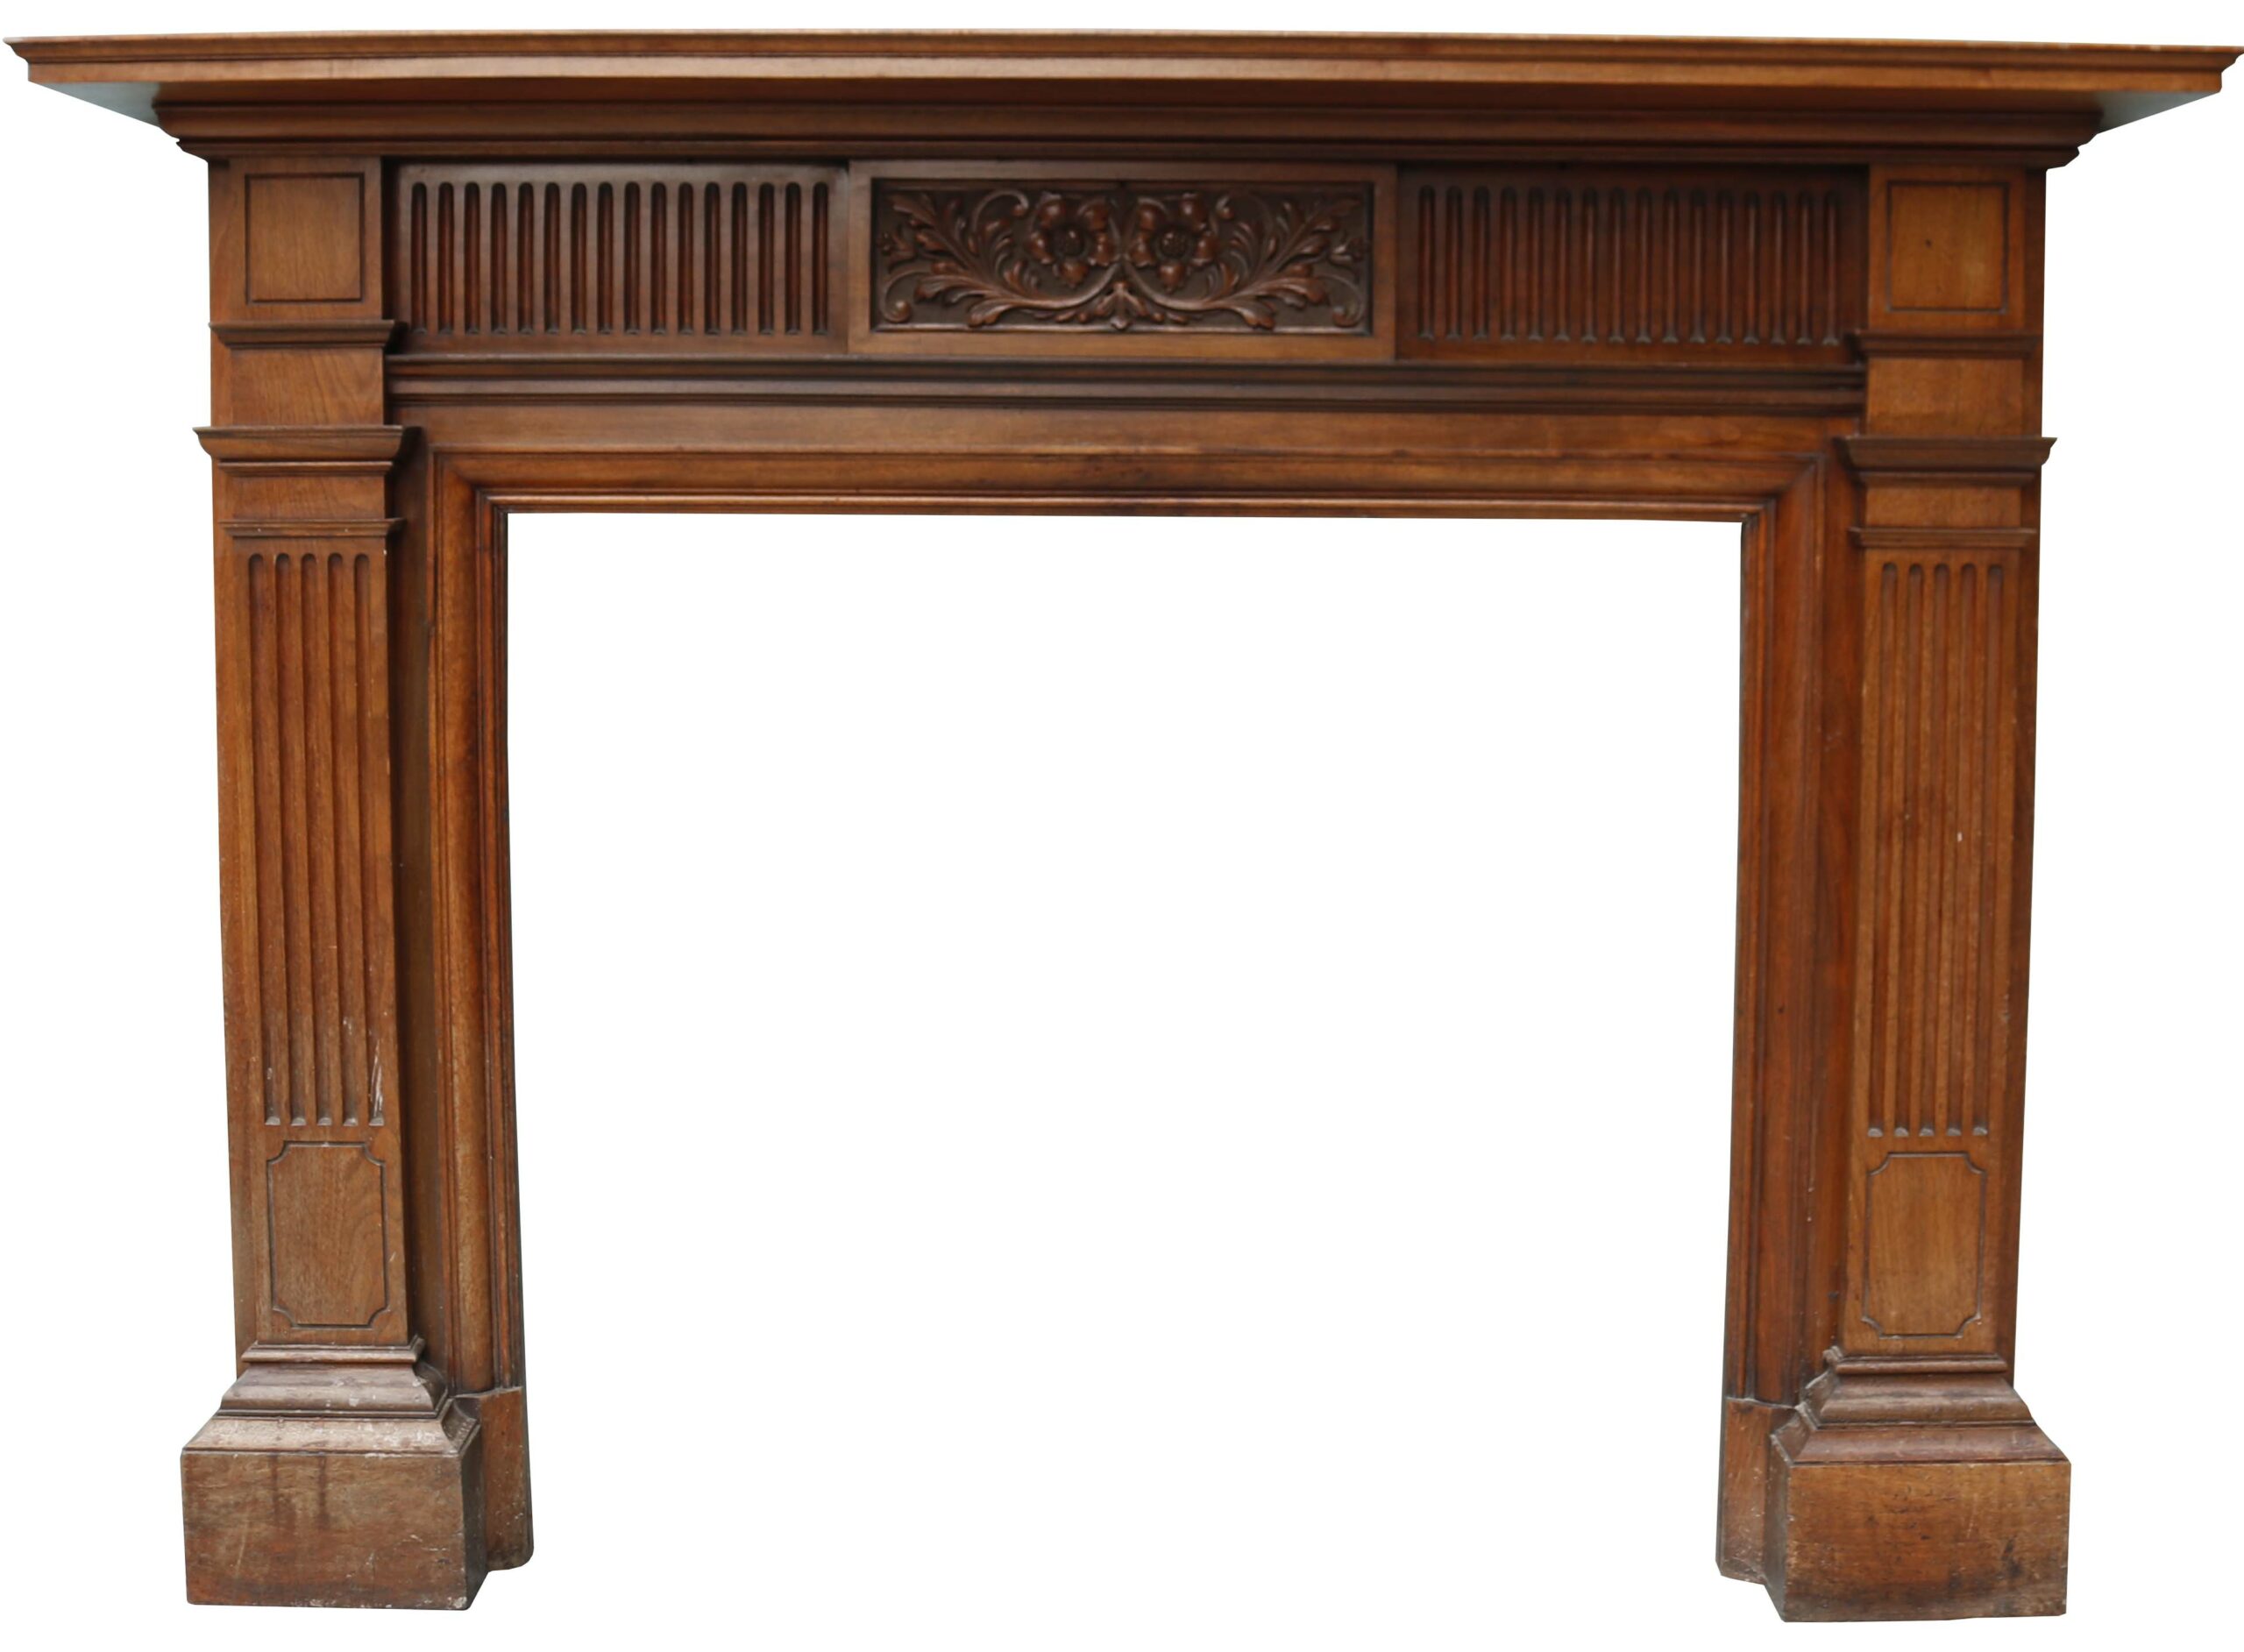 Antique Victorian Carved Timber Fire Surround